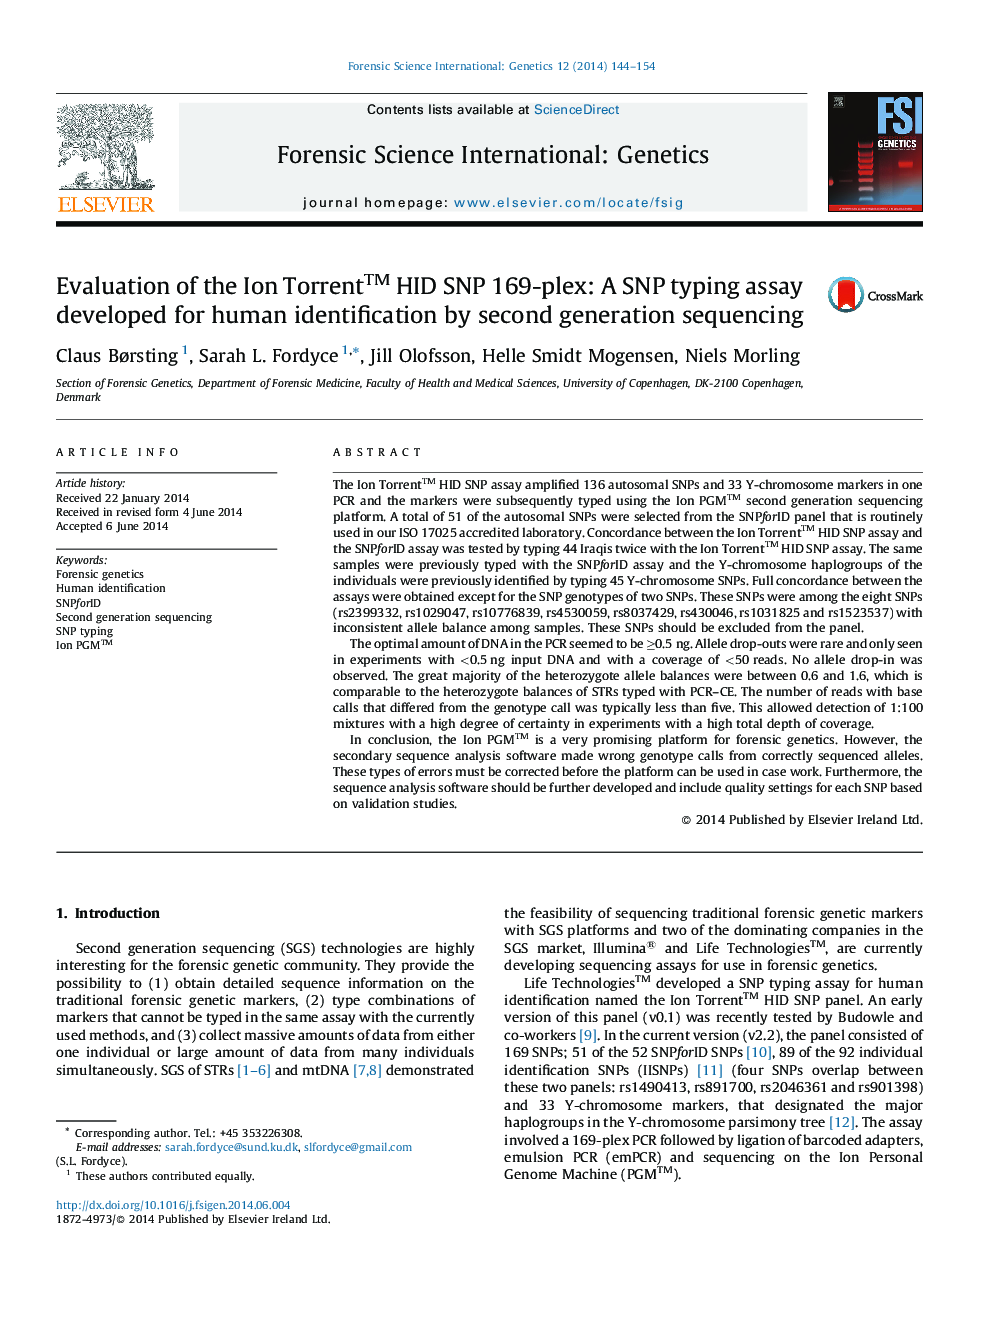 Evaluation of the Ion Torrentâ¢ HID SNP 169-plex: A SNP typing assay developed for human identification by second generation sequencing